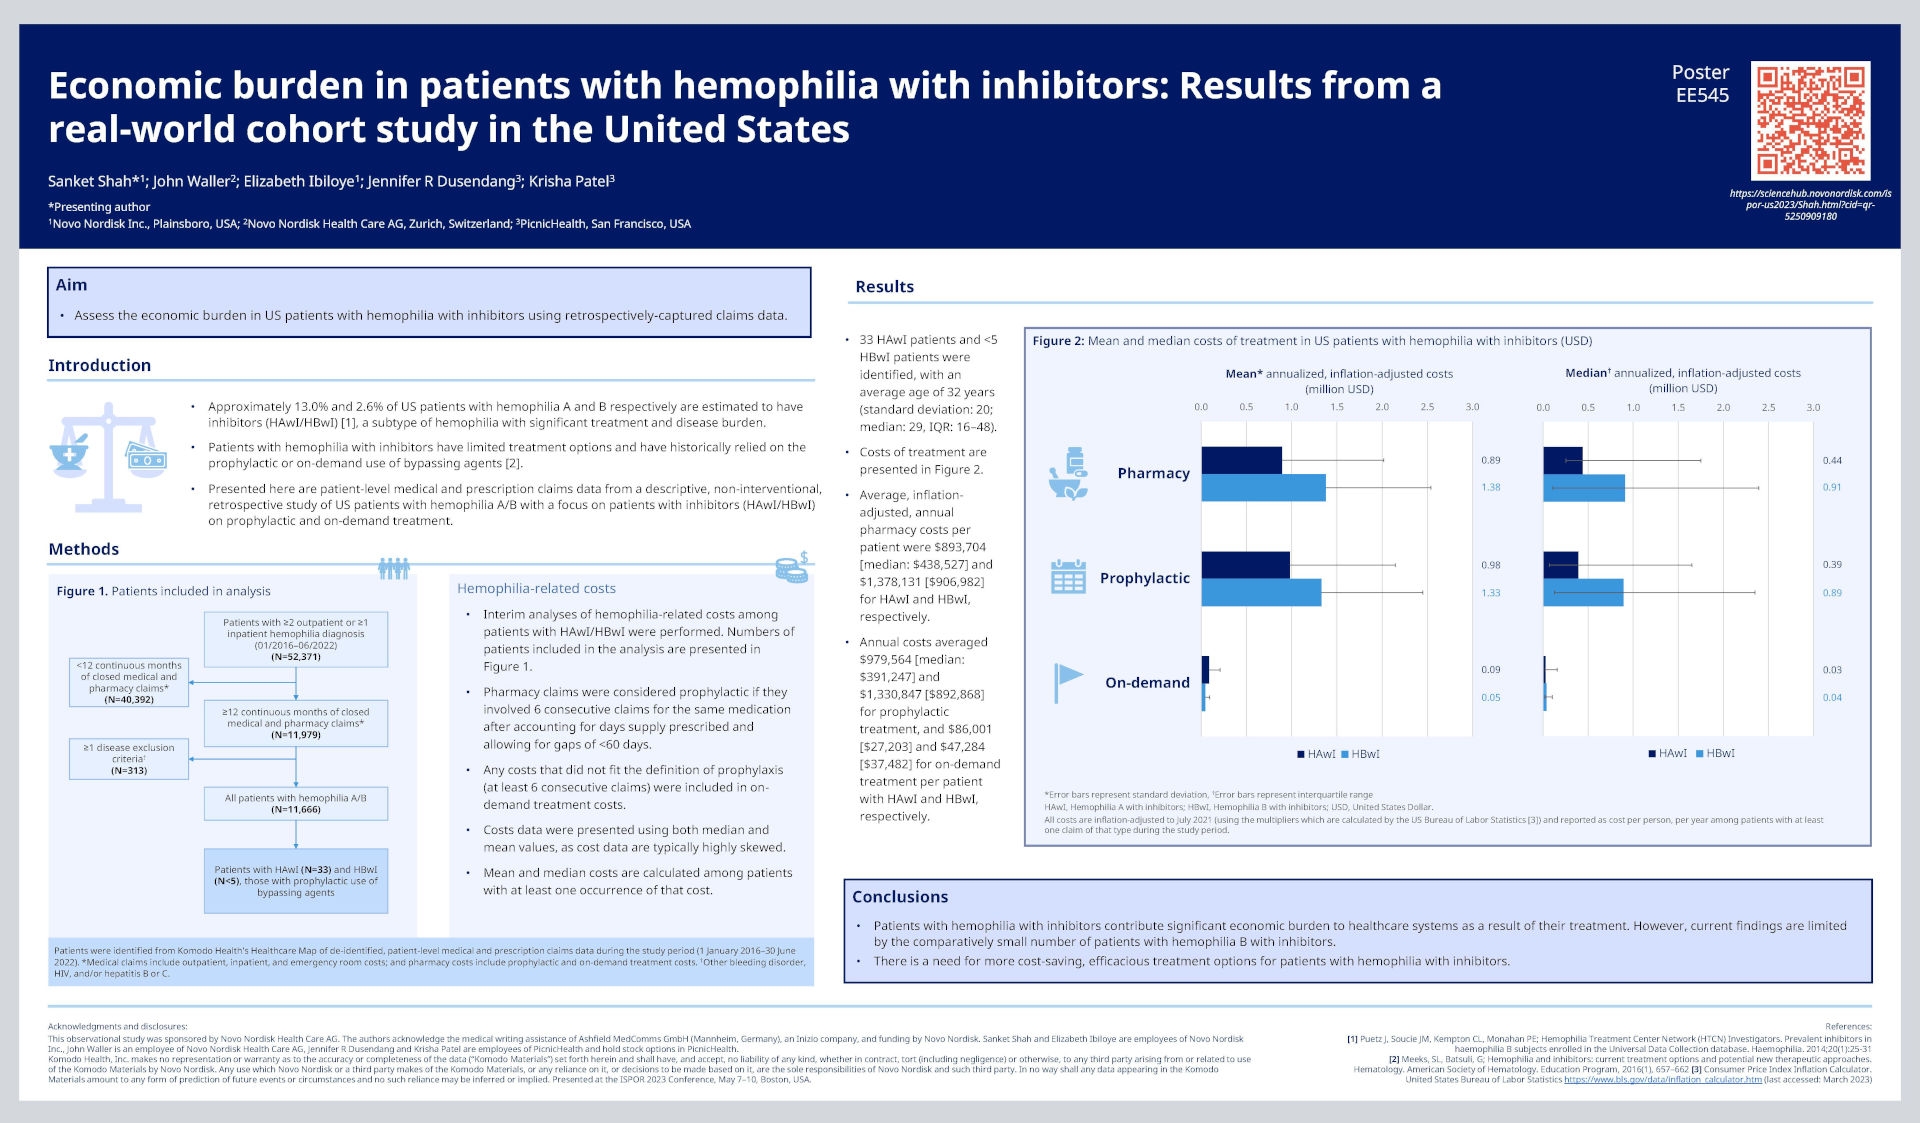 Economic burden in patients with hemophilia with inhibitors: Results from a real-world cohort study in the United States - poster